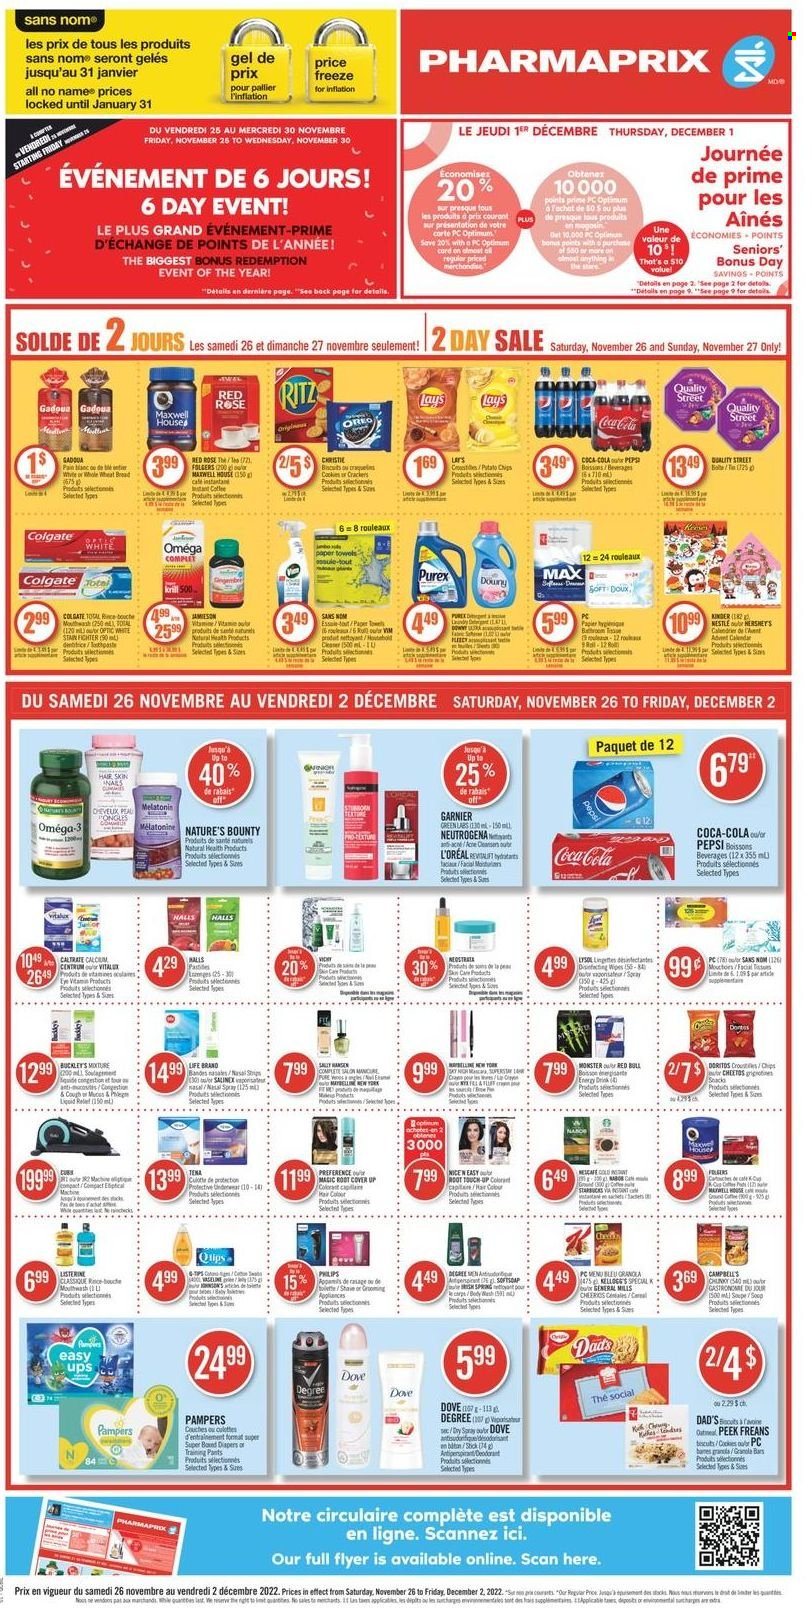 thumbnail - Pharmaprix Flyer - November 26, 2022 - December 02, 2022 - Sales products - Philips, Ace, No Name, soup, advent calendar, Reese's, Hershey's, Dove, Halls, crackers, Kellogg's, RITZ, Doritos, Cheetos, chips, Lay’s, Cheerios, granola bar, rice, Coca-Cola, Pepsi, energy drink, Monster, Red Bull, Maxwell House, Folgers, Starbucks, rosé wine, wipes, pants, nappies, baby pants, kitchen towels, paper towels, Lysol, Purex, body wash, mouthwash, L’Oréal, Root Touch-Up, hair color, anti-perspirant, Maybelline, lid, calendar, Optimum, Plus Plus, rose, Melatonin, Nature's Bounty, Omega-3, Centrum, calcium, Colgate, Garnier, Listerine, Nestlé, Neutrogena, Sally Hansen, Pampers, Oreo, Nescafé, deodorant. Page 1.